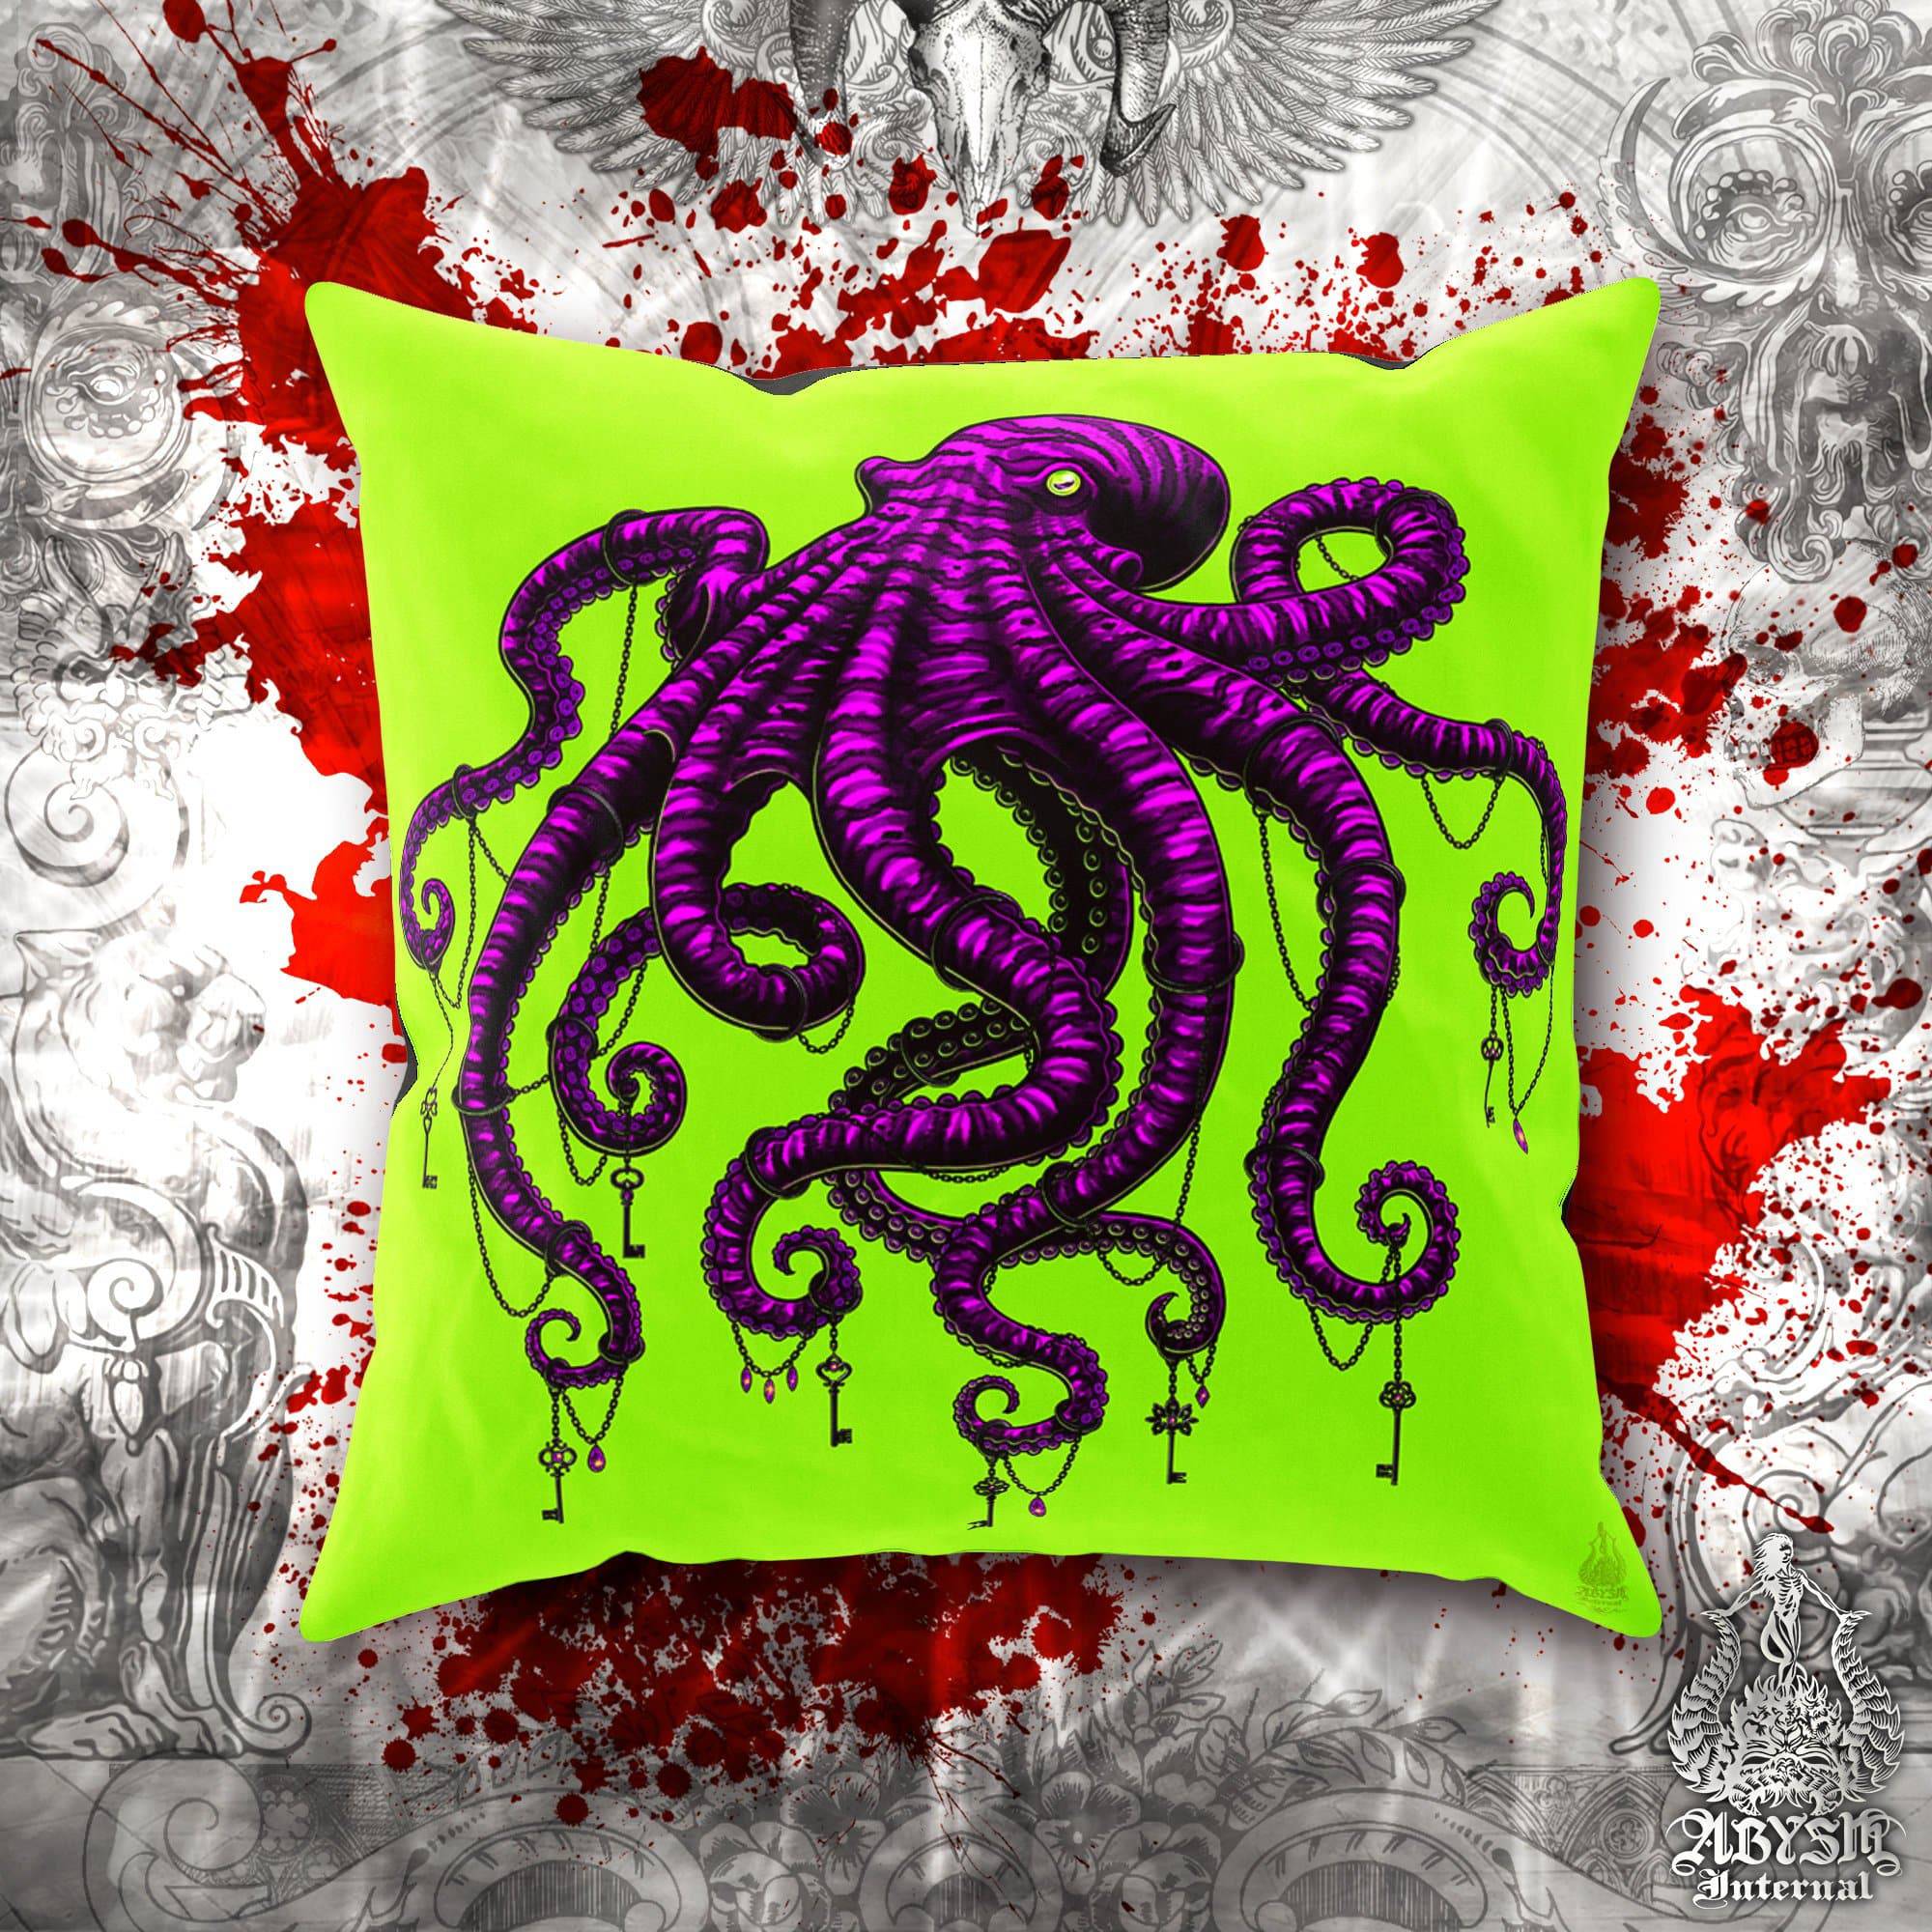 Octopus Throw Pillow, Decorative Accent Cushion, Eclectic Gamer Room Decor, Alternative Home - Neon Gothic - Abysm Internal